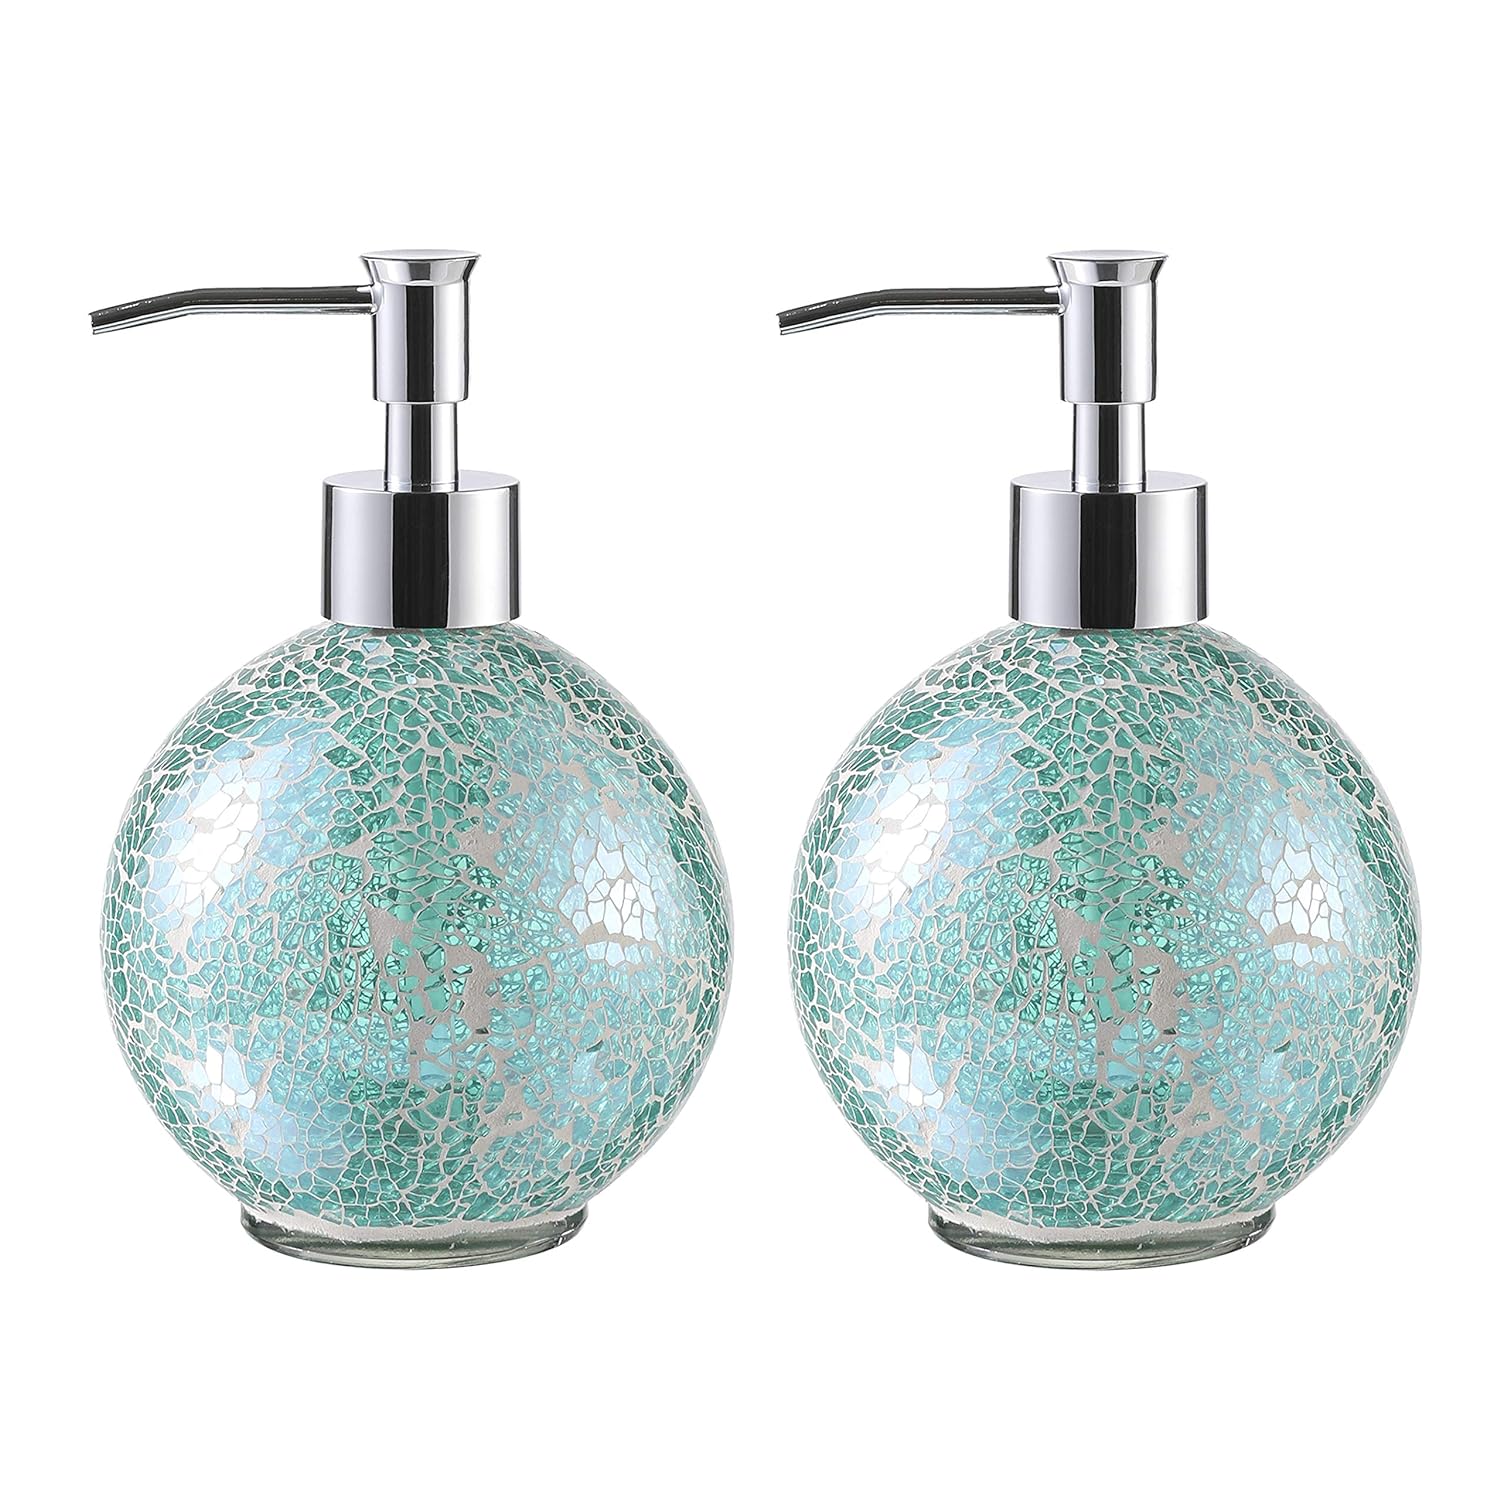 WHOLE HOUSEWARES | Glass Mosaic Hand Soap Dispenser for Bathroom | Lotion Bottle for Kitchen, Bathroom with Chrome Plated Plastic Pump |14 Ounce Set of 2 (Turquoise)